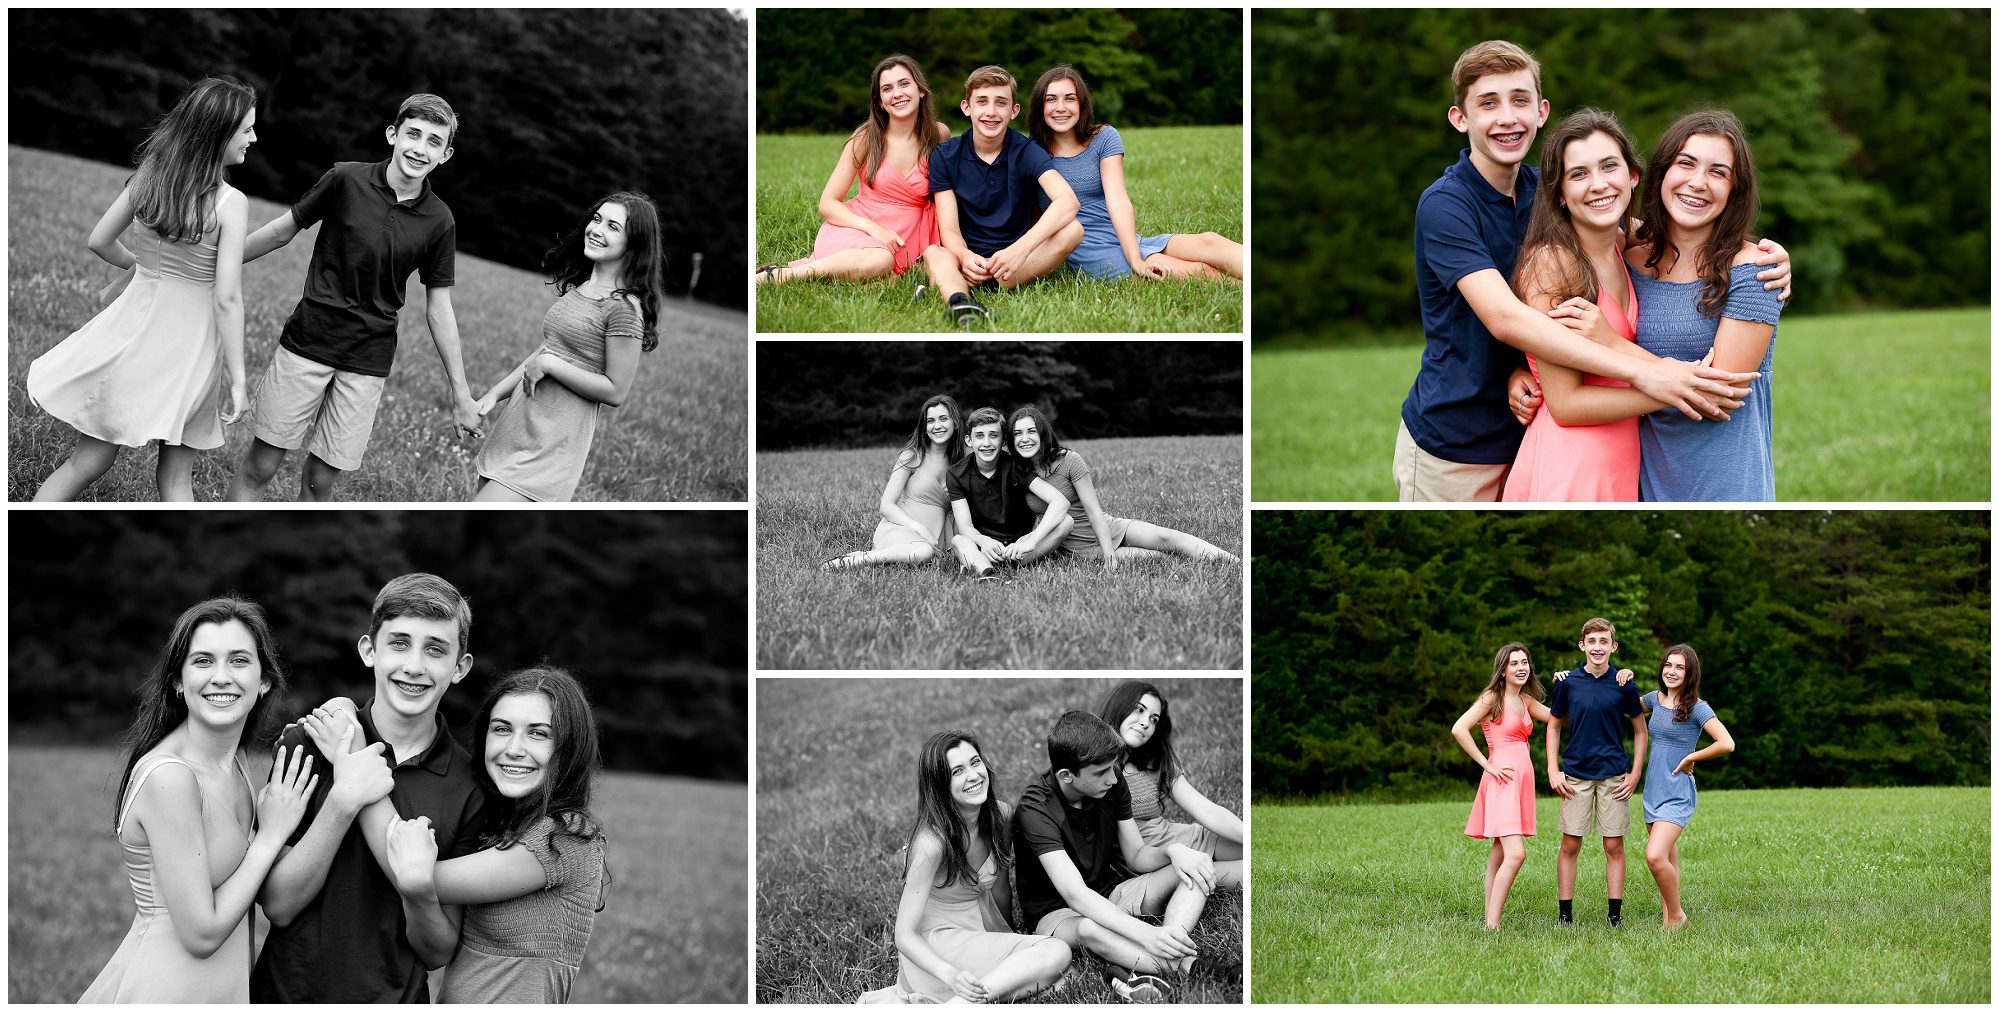 Fluvanna Family Summer Portraits Photographer Session Pictures Photoshoot Siblings Palmyra Lake Monticello Pleasant Grove Fun Teens Teenagers Fluco